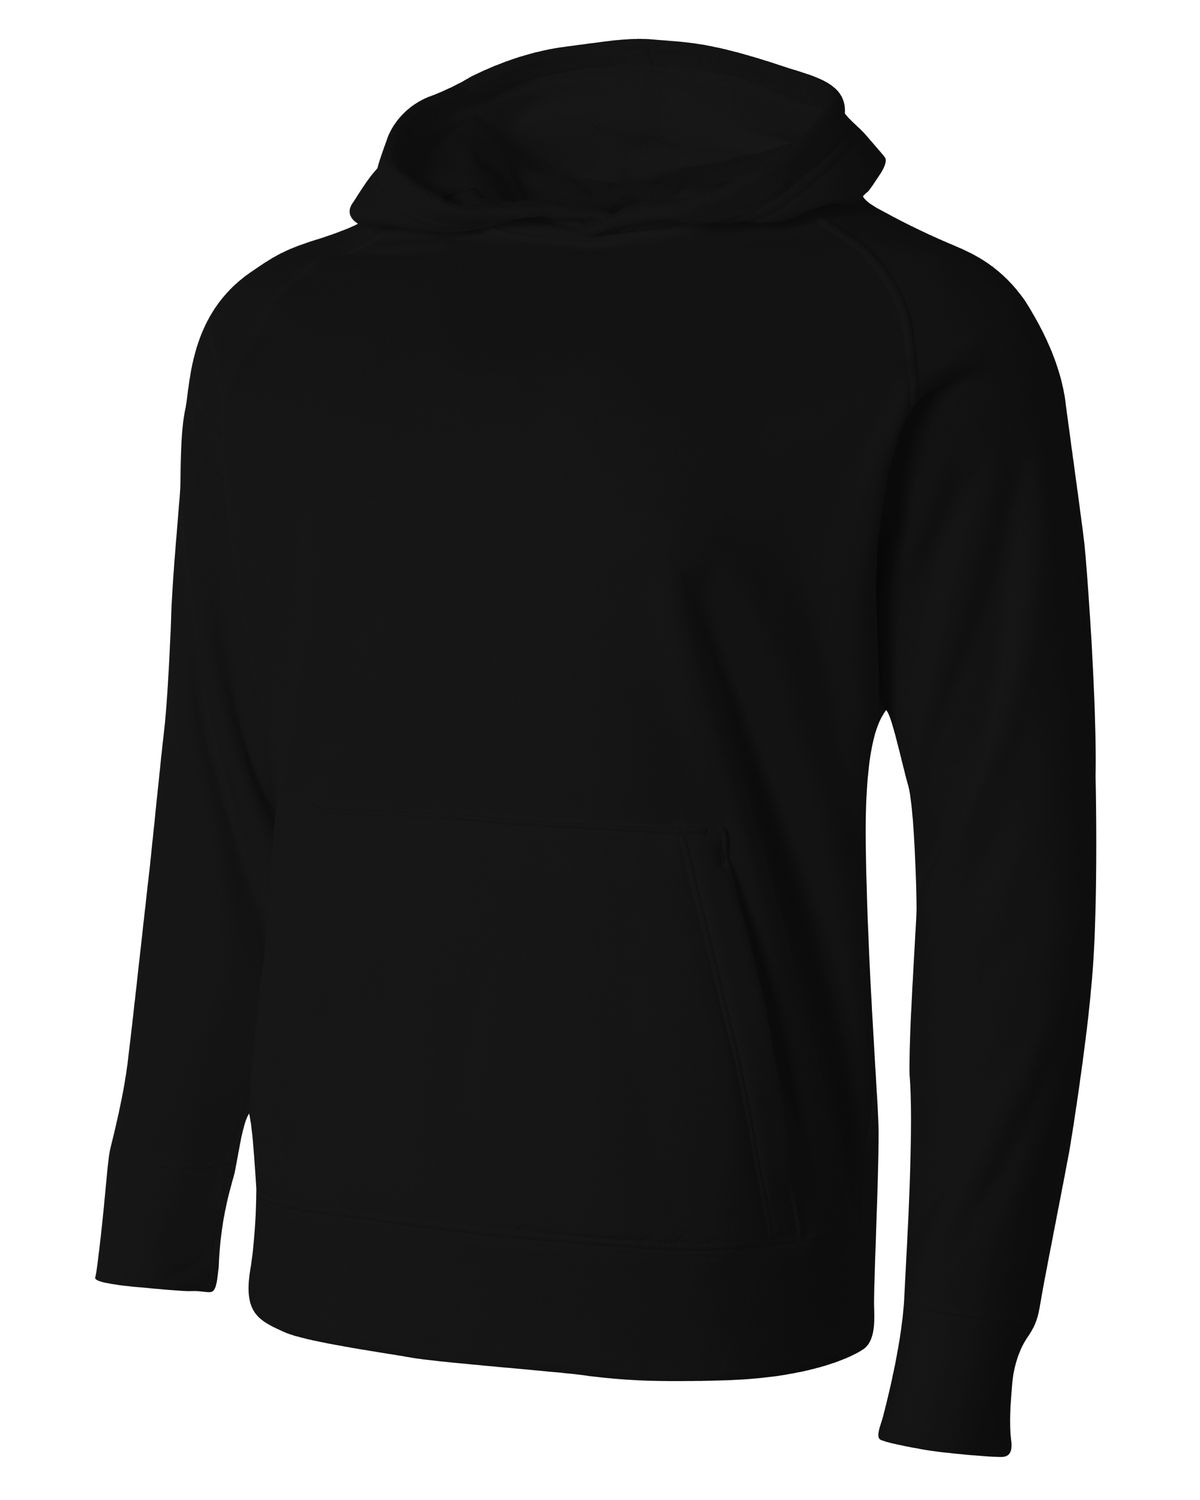 Wholesale A4 NB4237 | Buy Youth Solid Tech Fleece Pullover Hoodie ...